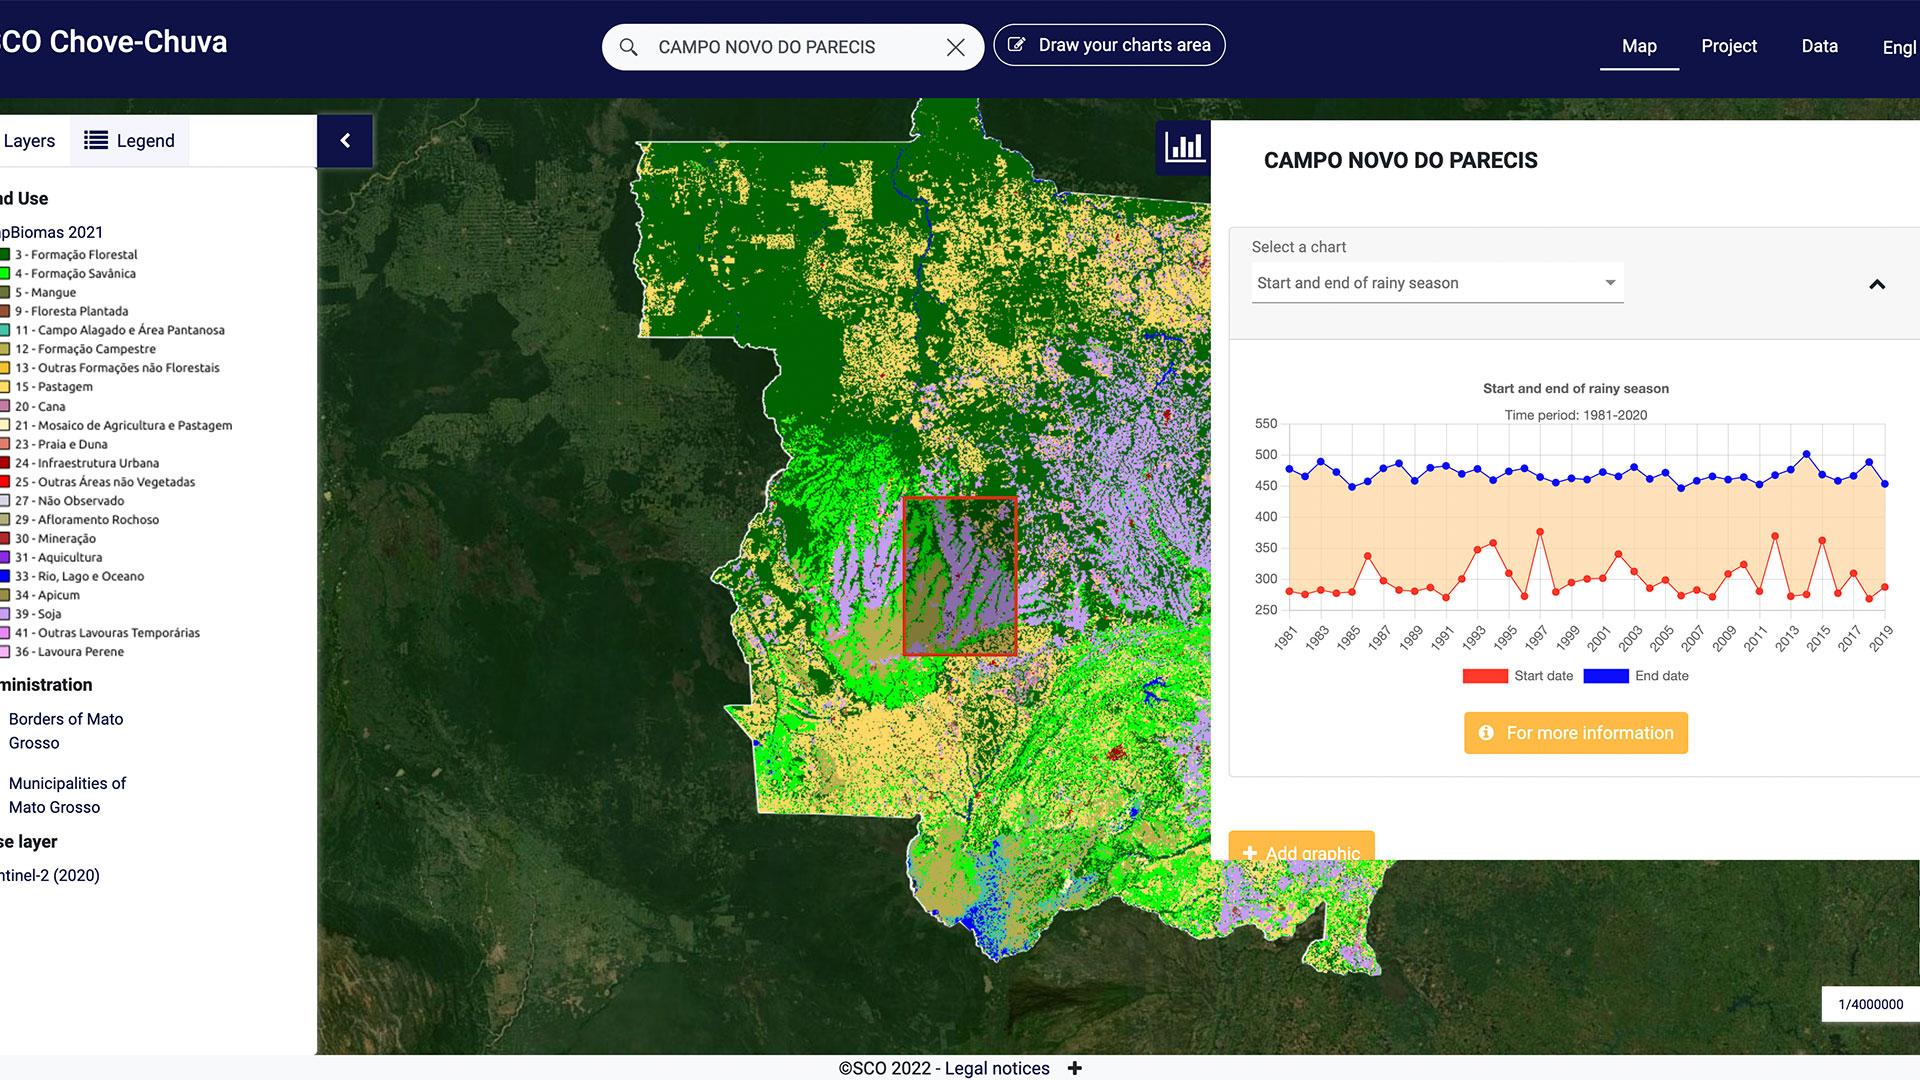 Chove-Chuva uses spatialised data to monitor territorial dynamics in Mato-Grosso. Here, the interface shows the land use map and rainy season statistics for the municipality of Campo Novo de Parecis.